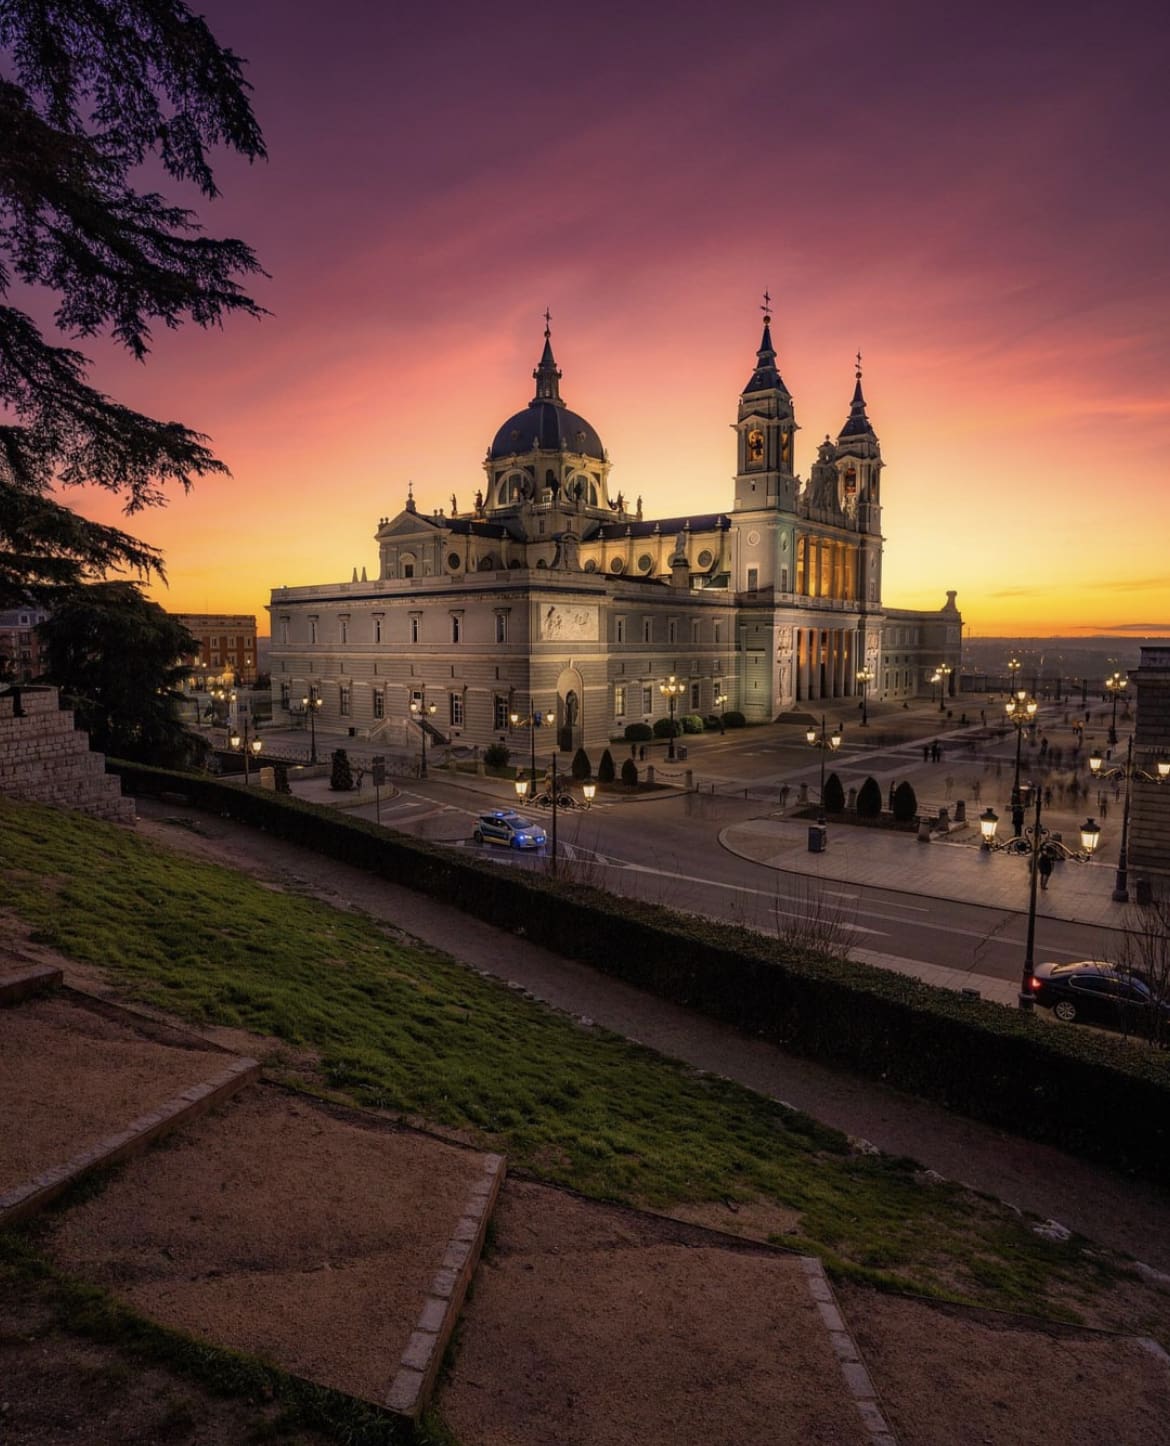 Incredible skies and architecture in Madrid - Must-See Tourist Attractions in Spain